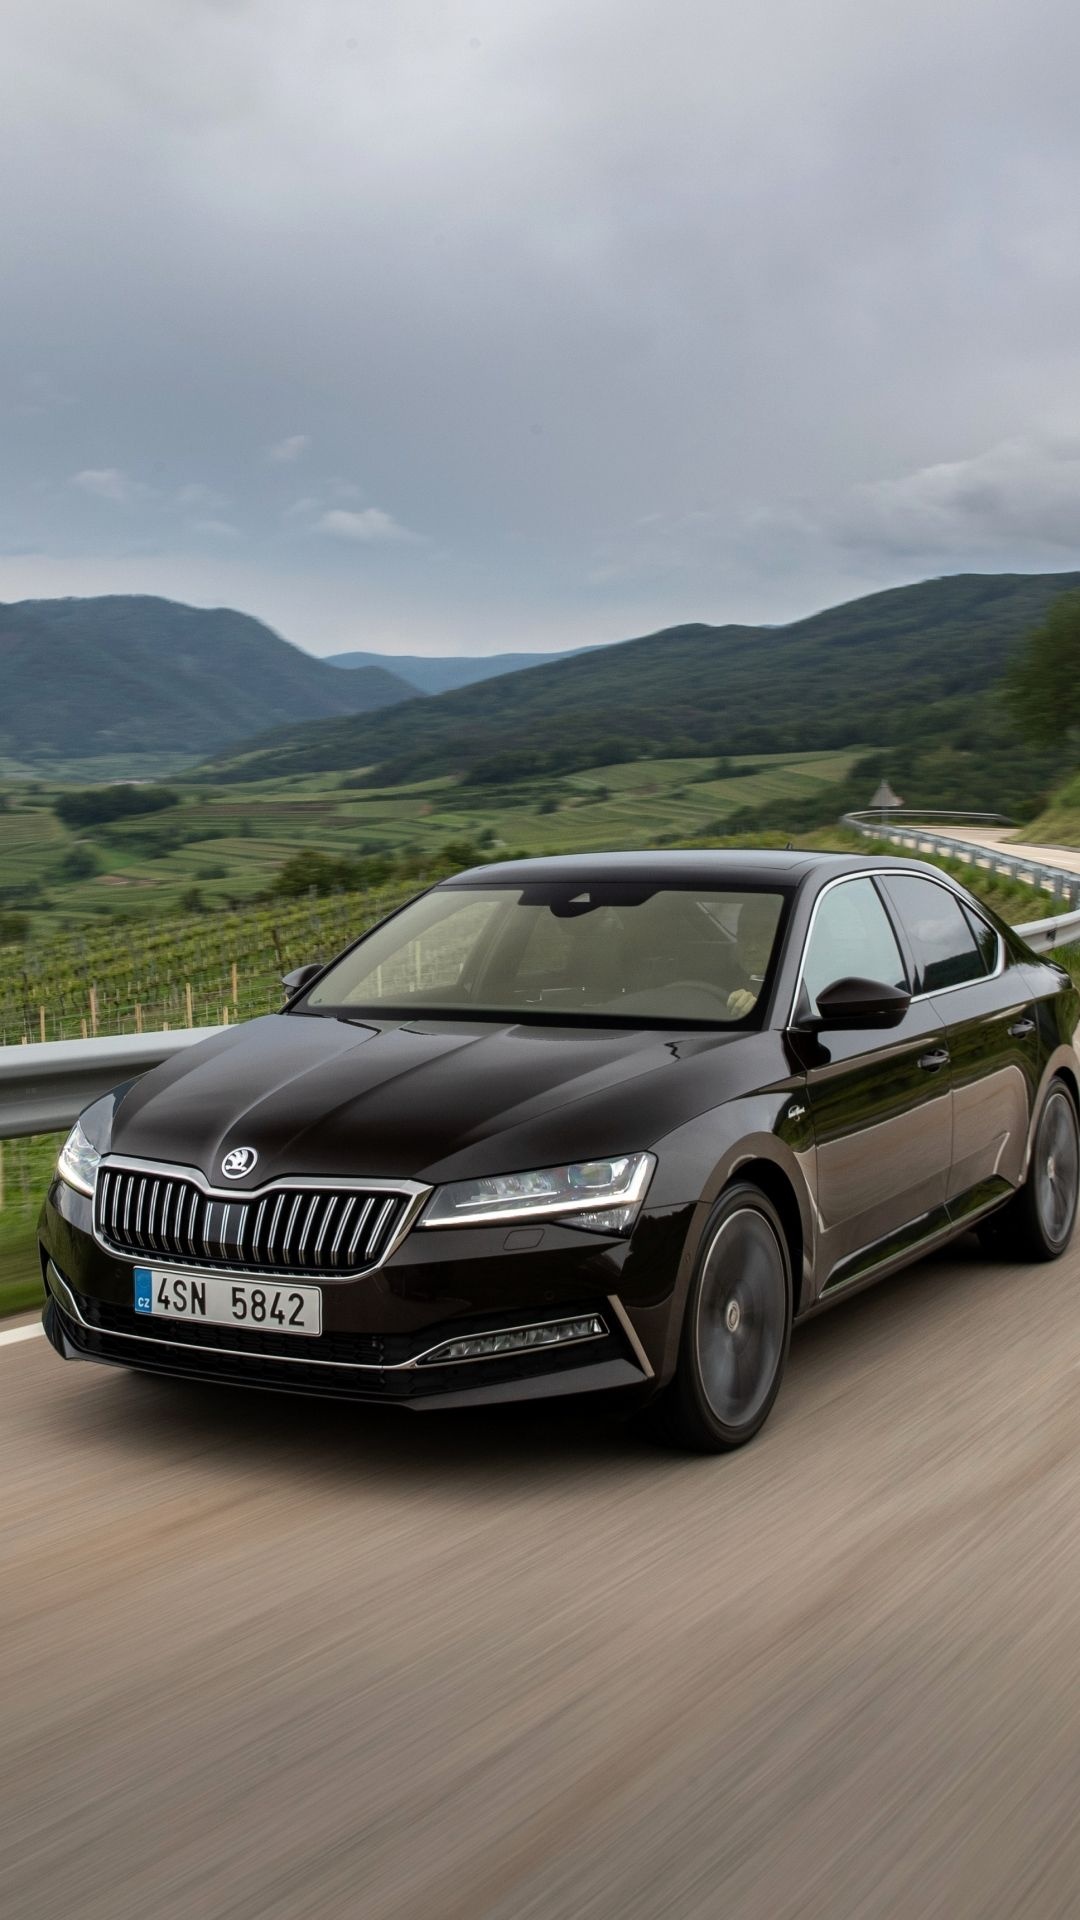 Skoda Superb, Incredible mobile wallpapers, Sophisticated design, Unmatched comfort, 1080x1920 Full HD Phone